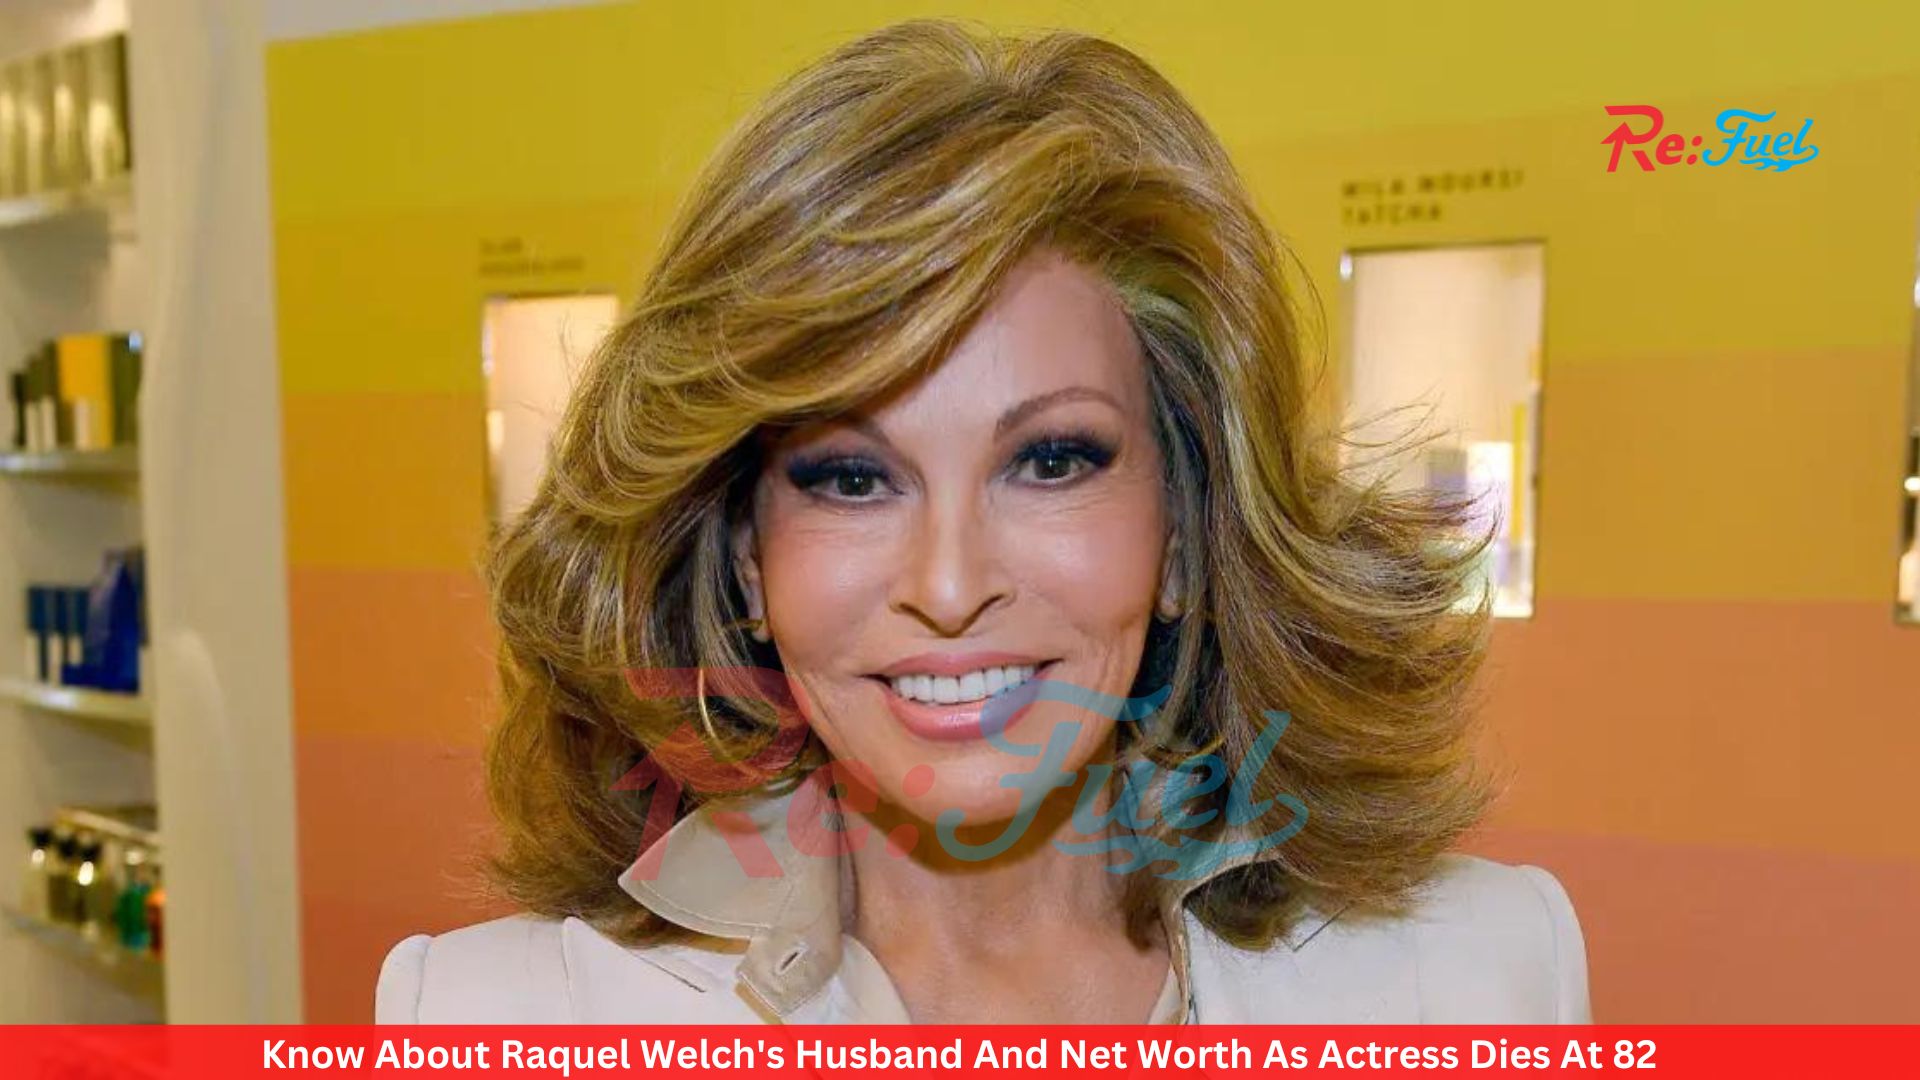 Know About Raquel Welch's Husband And Net Worth As Actress Dies At 82